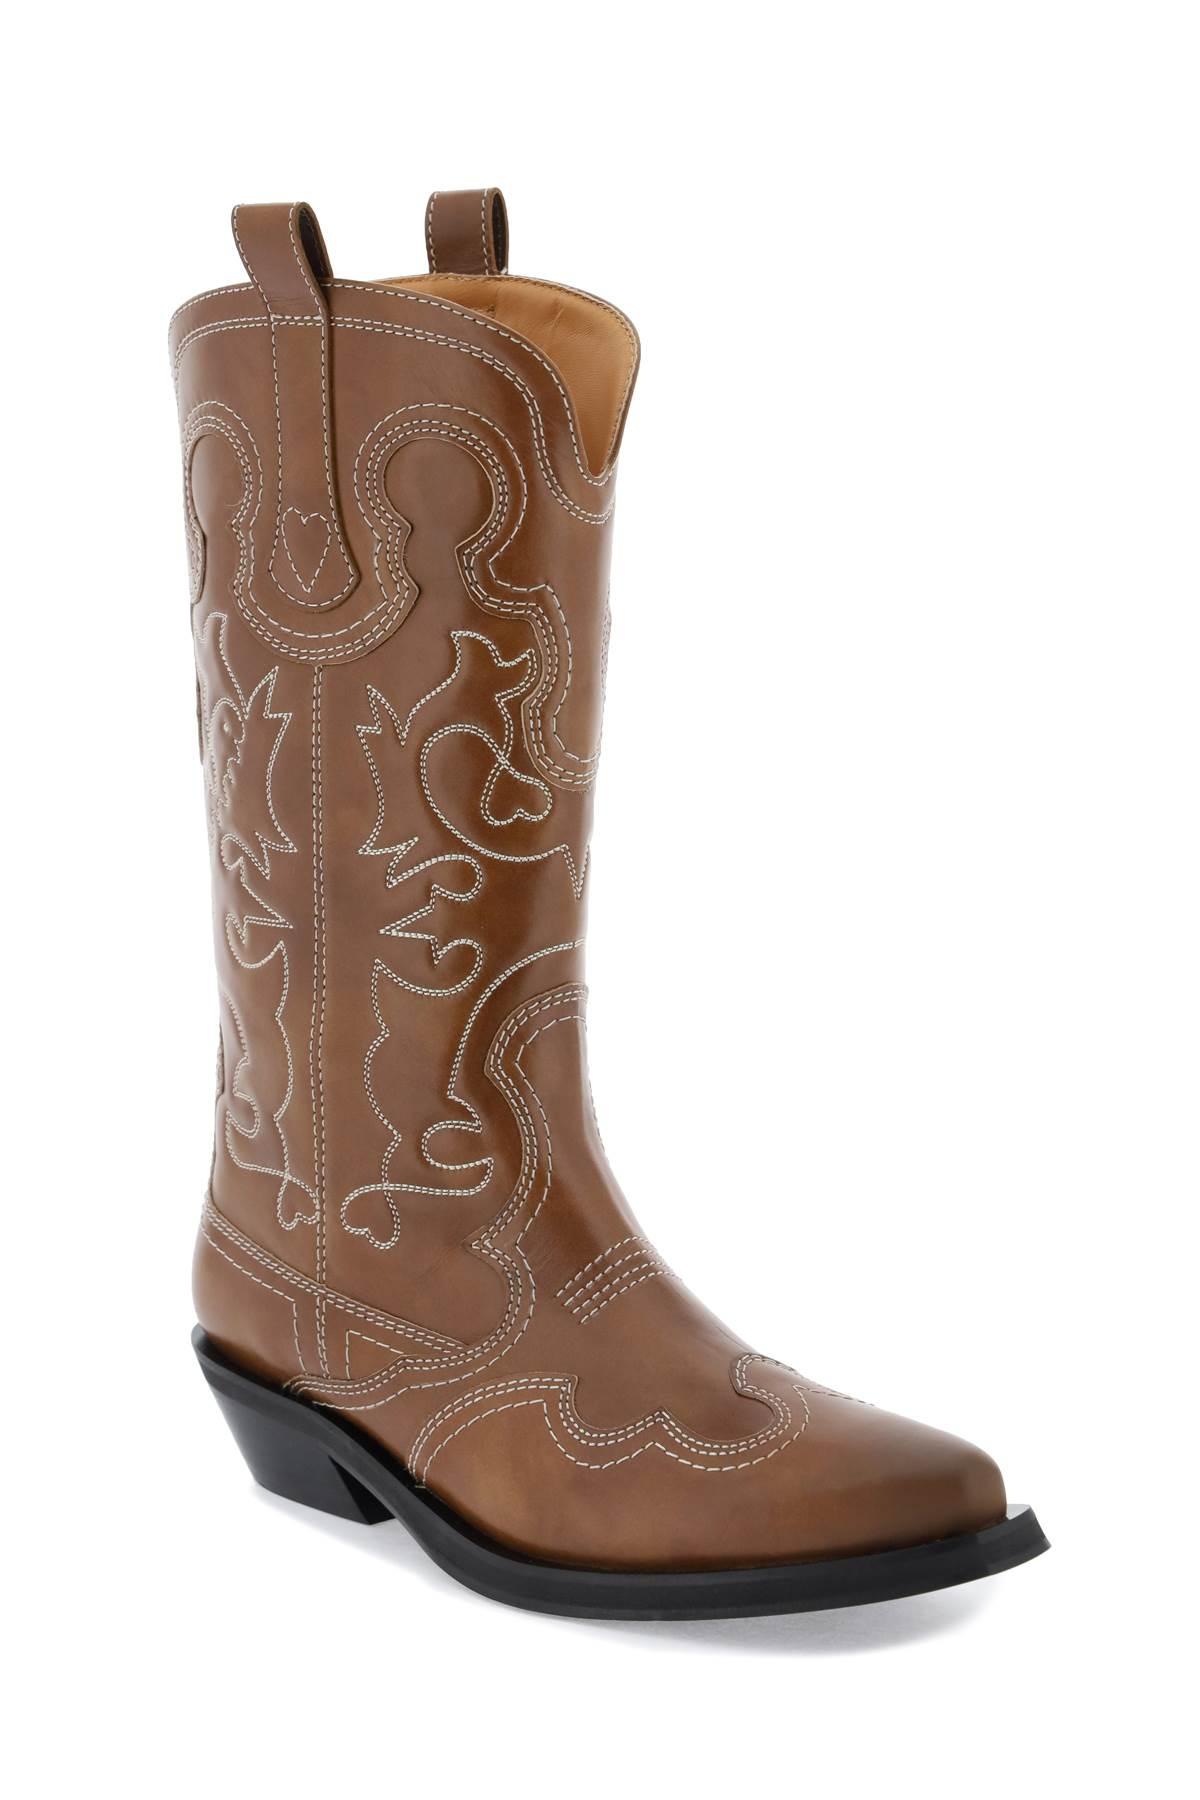 GANNI embroidered western boots